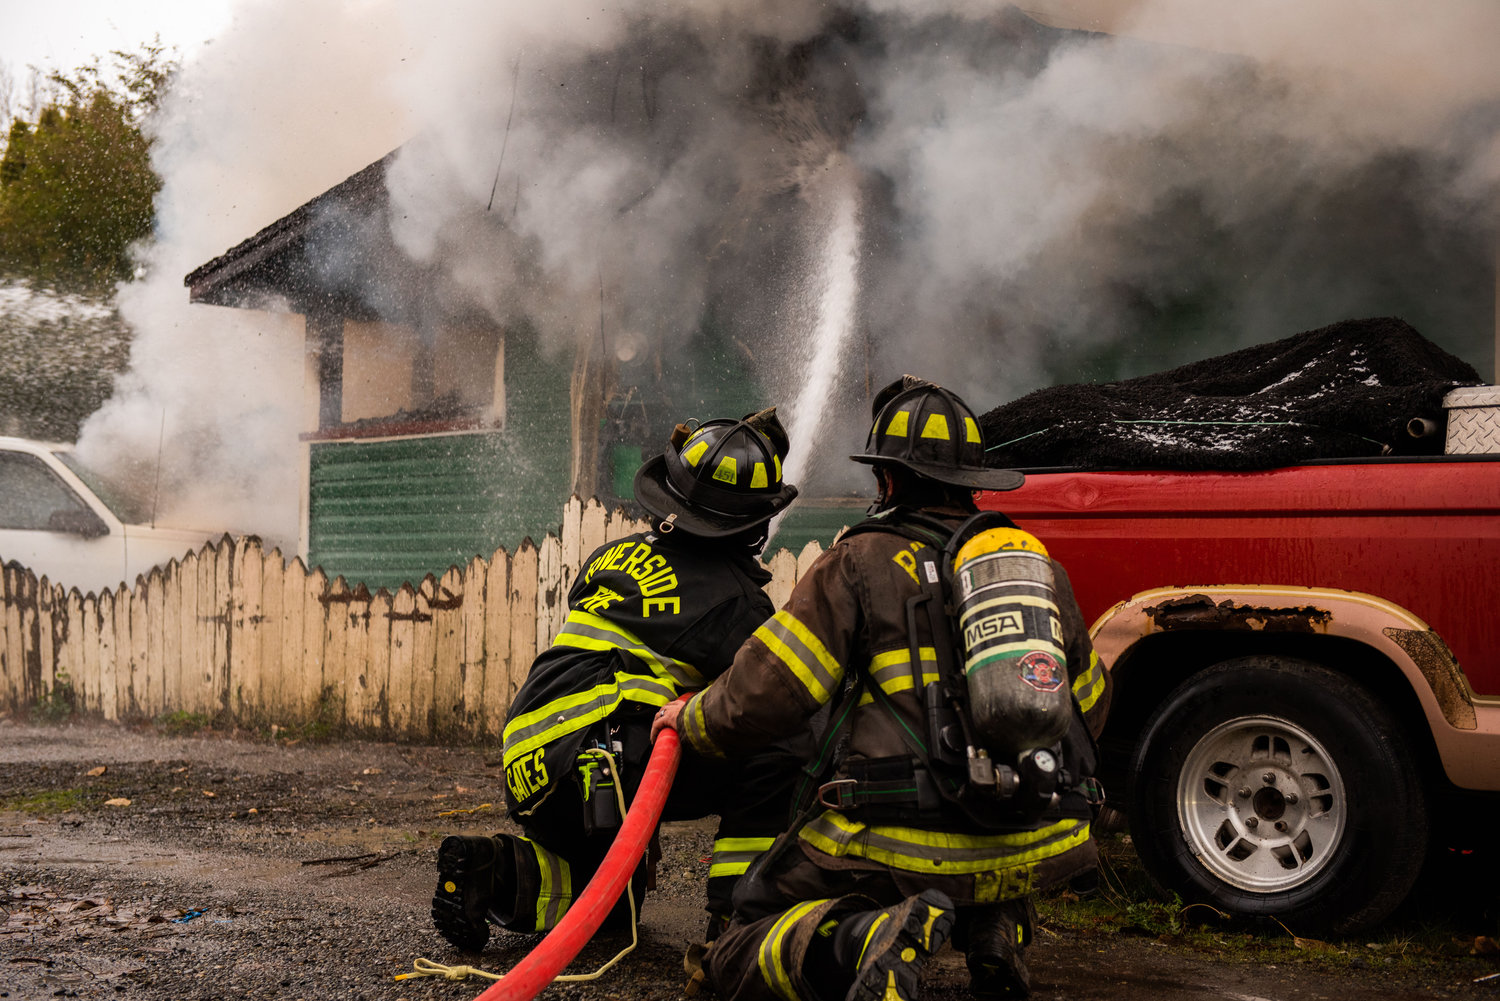 Riverside firefighters work to put out flames in a building off W. Main Street in Centralia on Sunday.